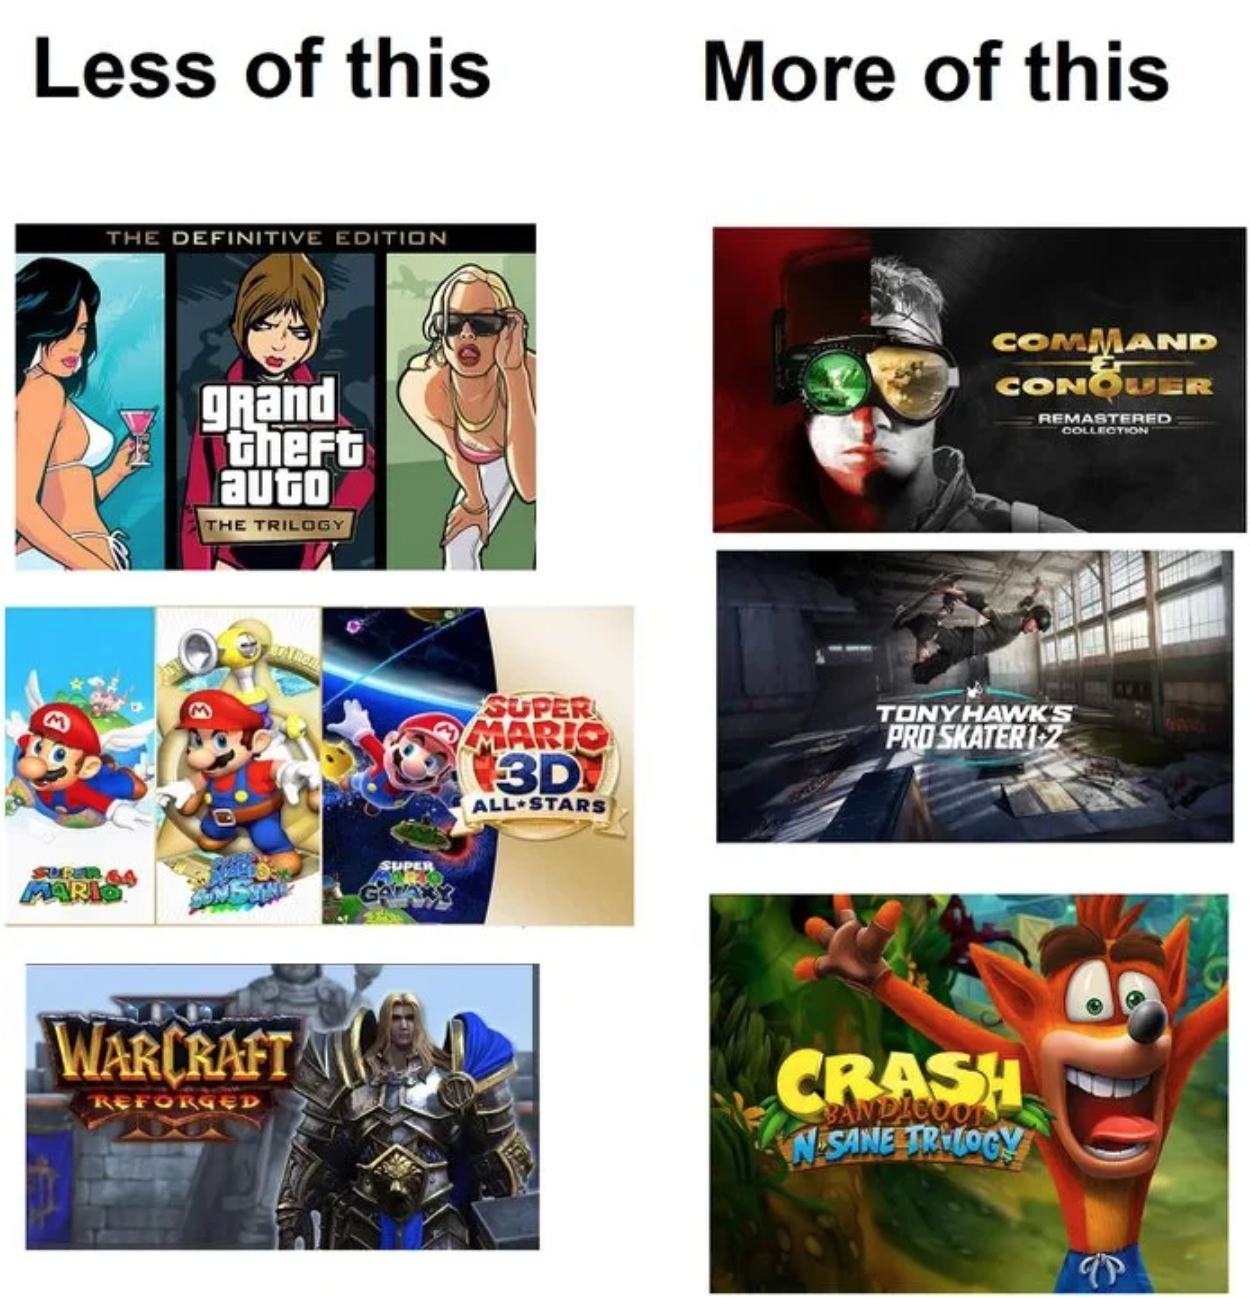 funny gaming memes  - gta online - Less of this More of this The Definitive Edition Command Conolor Remastered grand theft auto The Trilogy Tony Hawks Pro Skater Dz Super Mario 3D All Stars Warcraft Refokud Crash Visane TRitory 20